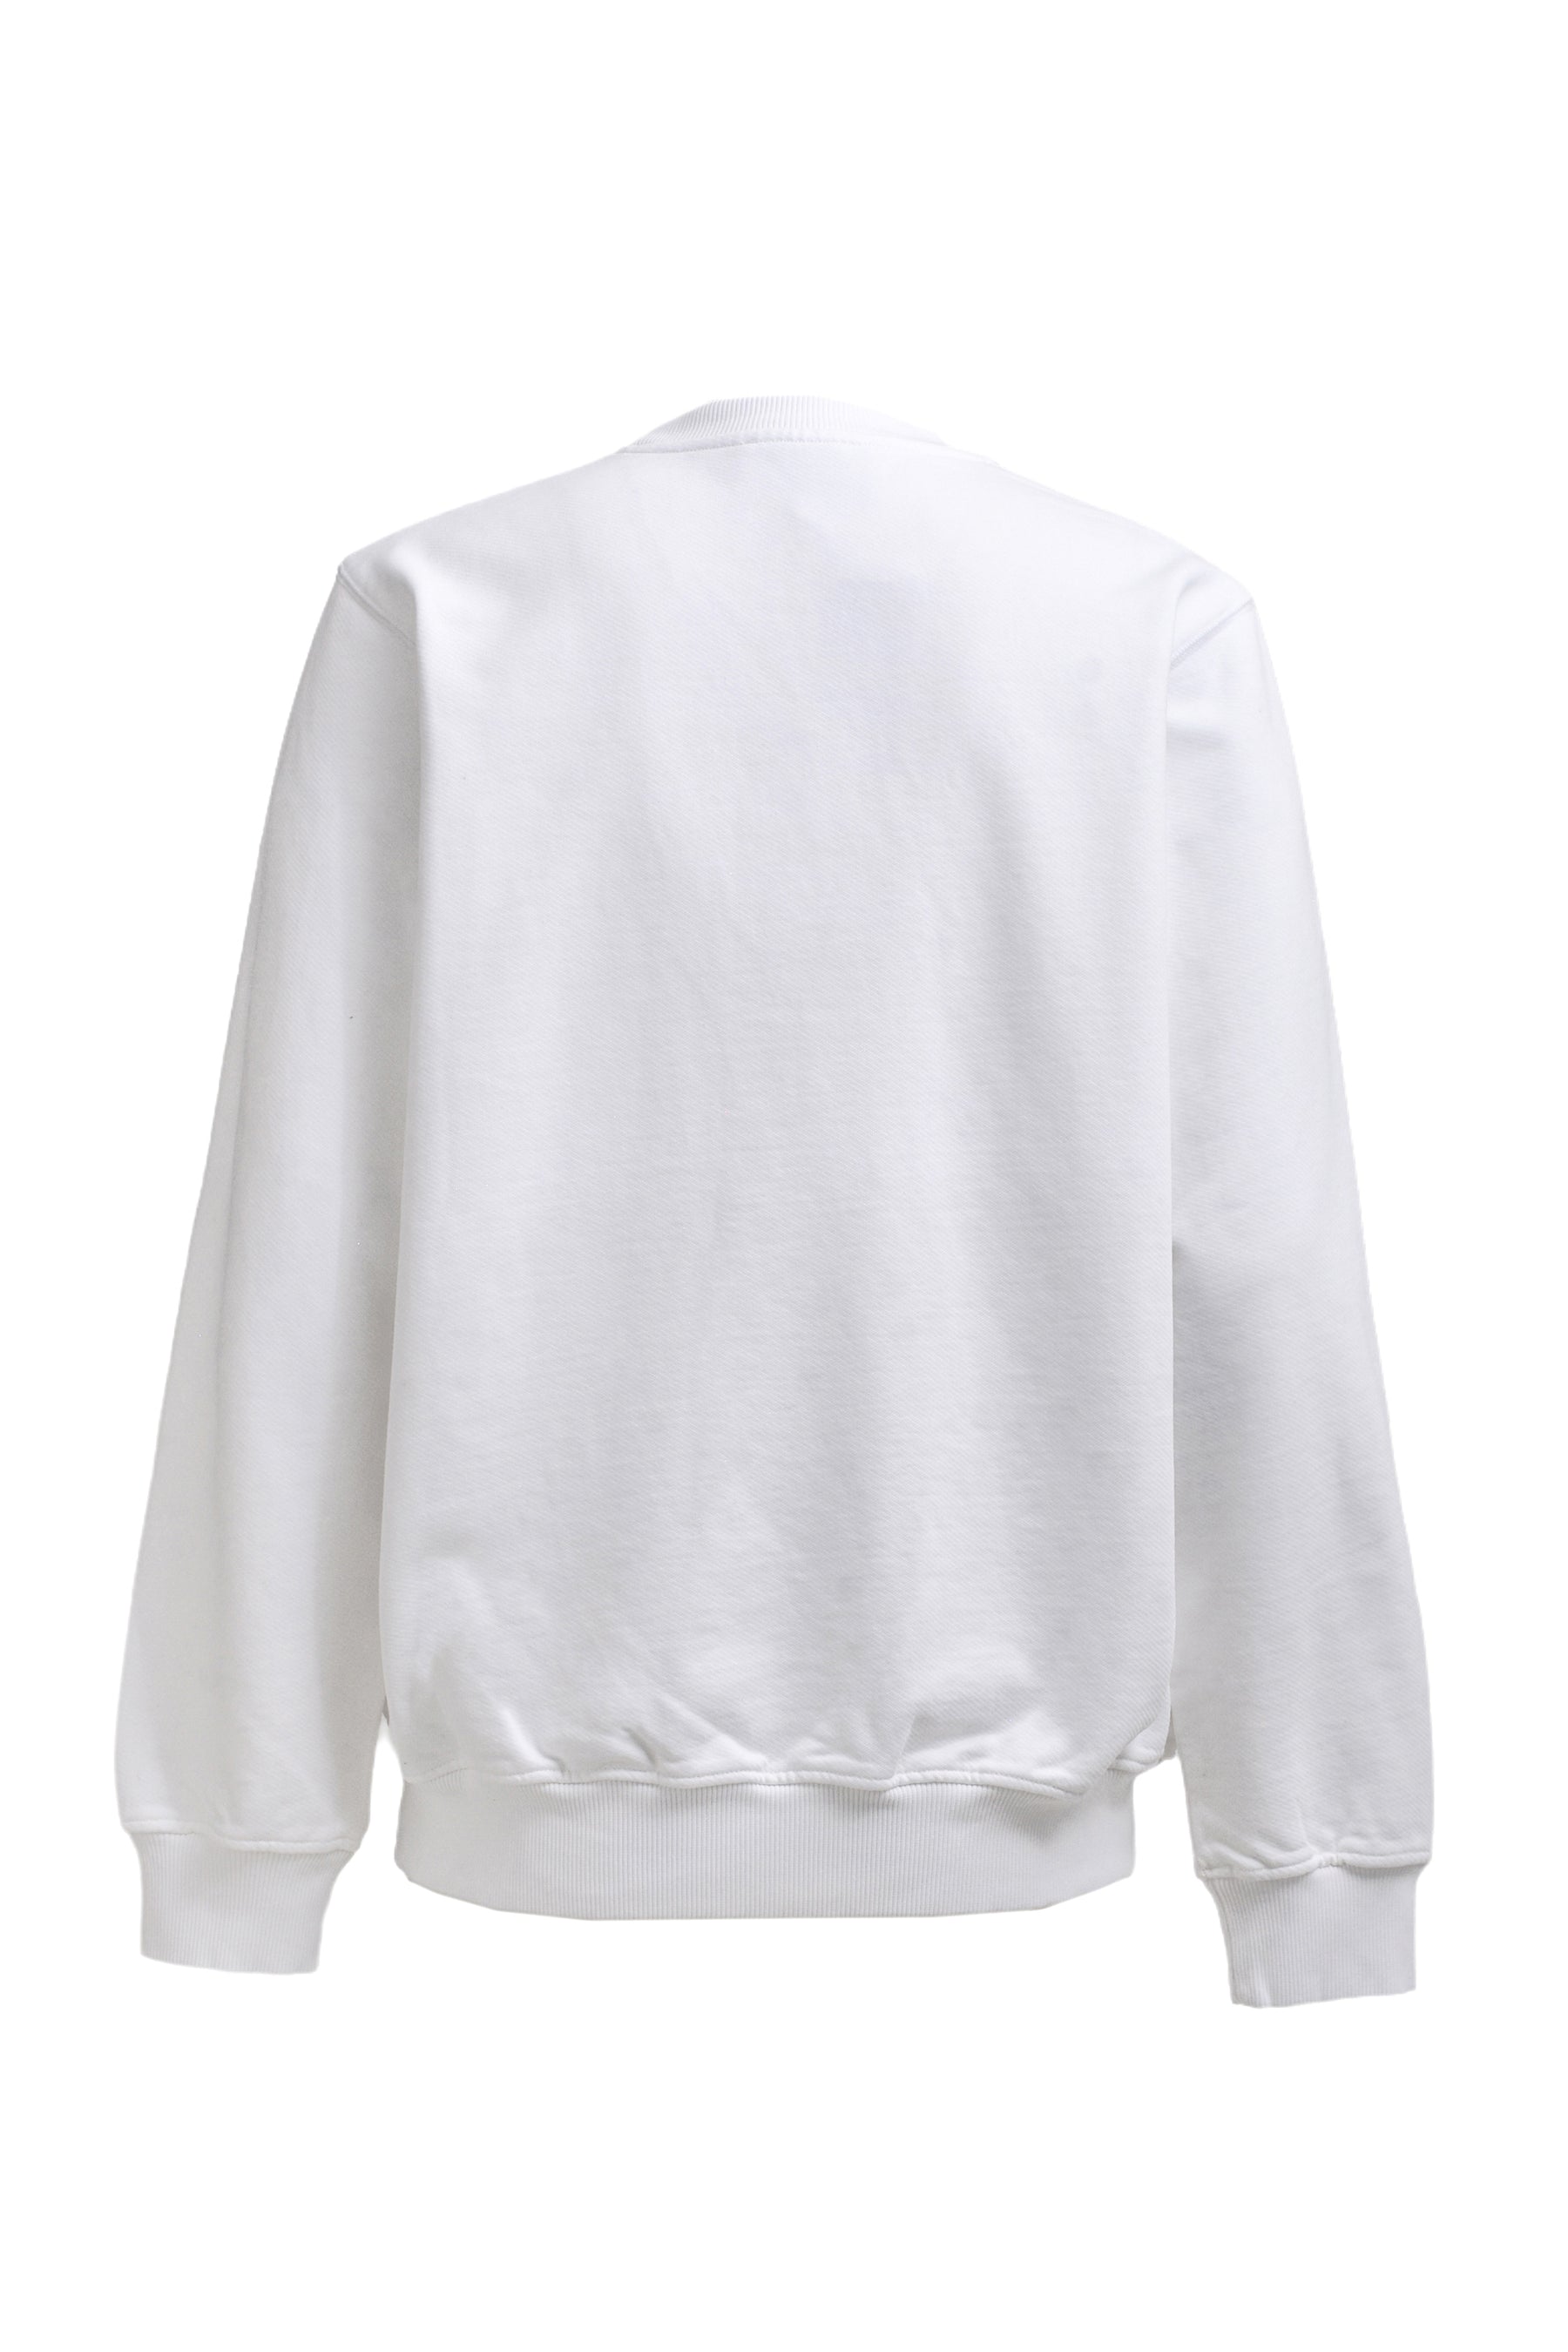 STACKED LOGO EMBROIDERED CHENILLE SWEATSHIRT / WHT